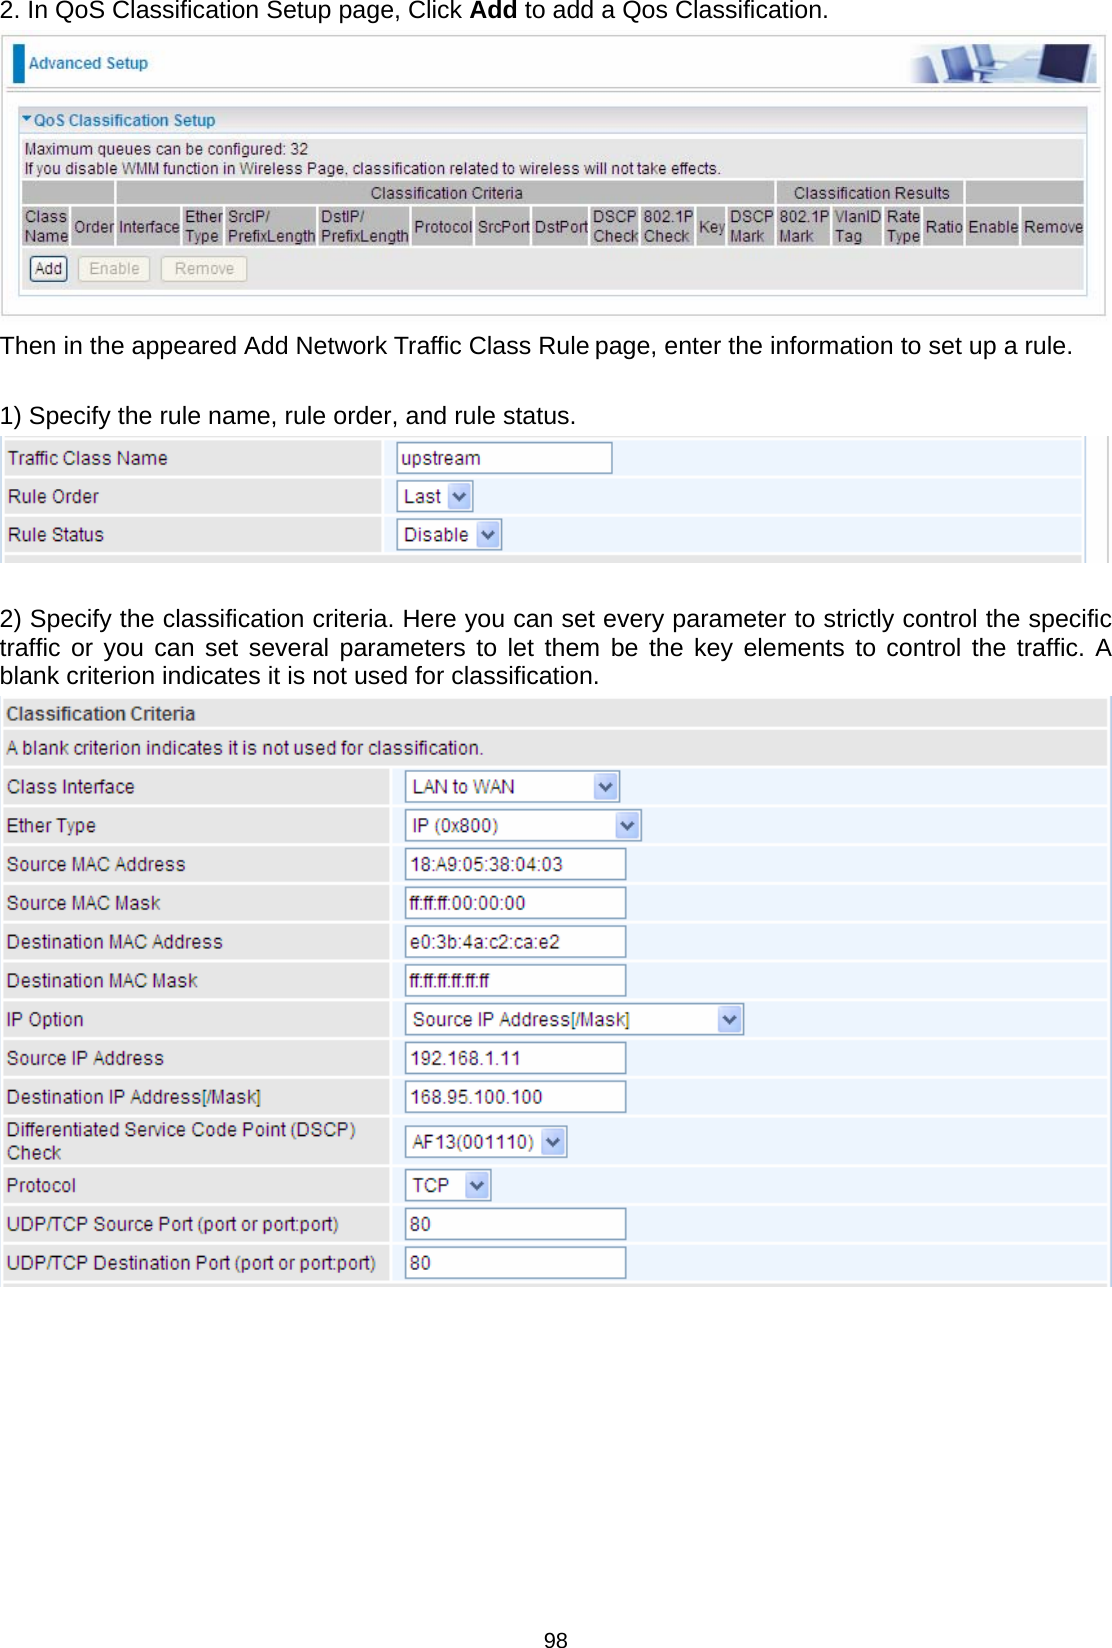  98 2. In QoS Classification Setup page, Click Add to add a Qos Classification.  Then in the appeared Add Network Traffic Class Rule page, enter the information to set up a rule.   1) Specify the rule name, rule order, and rule status.    2) Specify the classification criteria. Here you can set every parameter to strictly control the specific traffic or you can set several parameters to let them be the key elements to control the traffic. A blank criterion indicates it is not used for classification.           